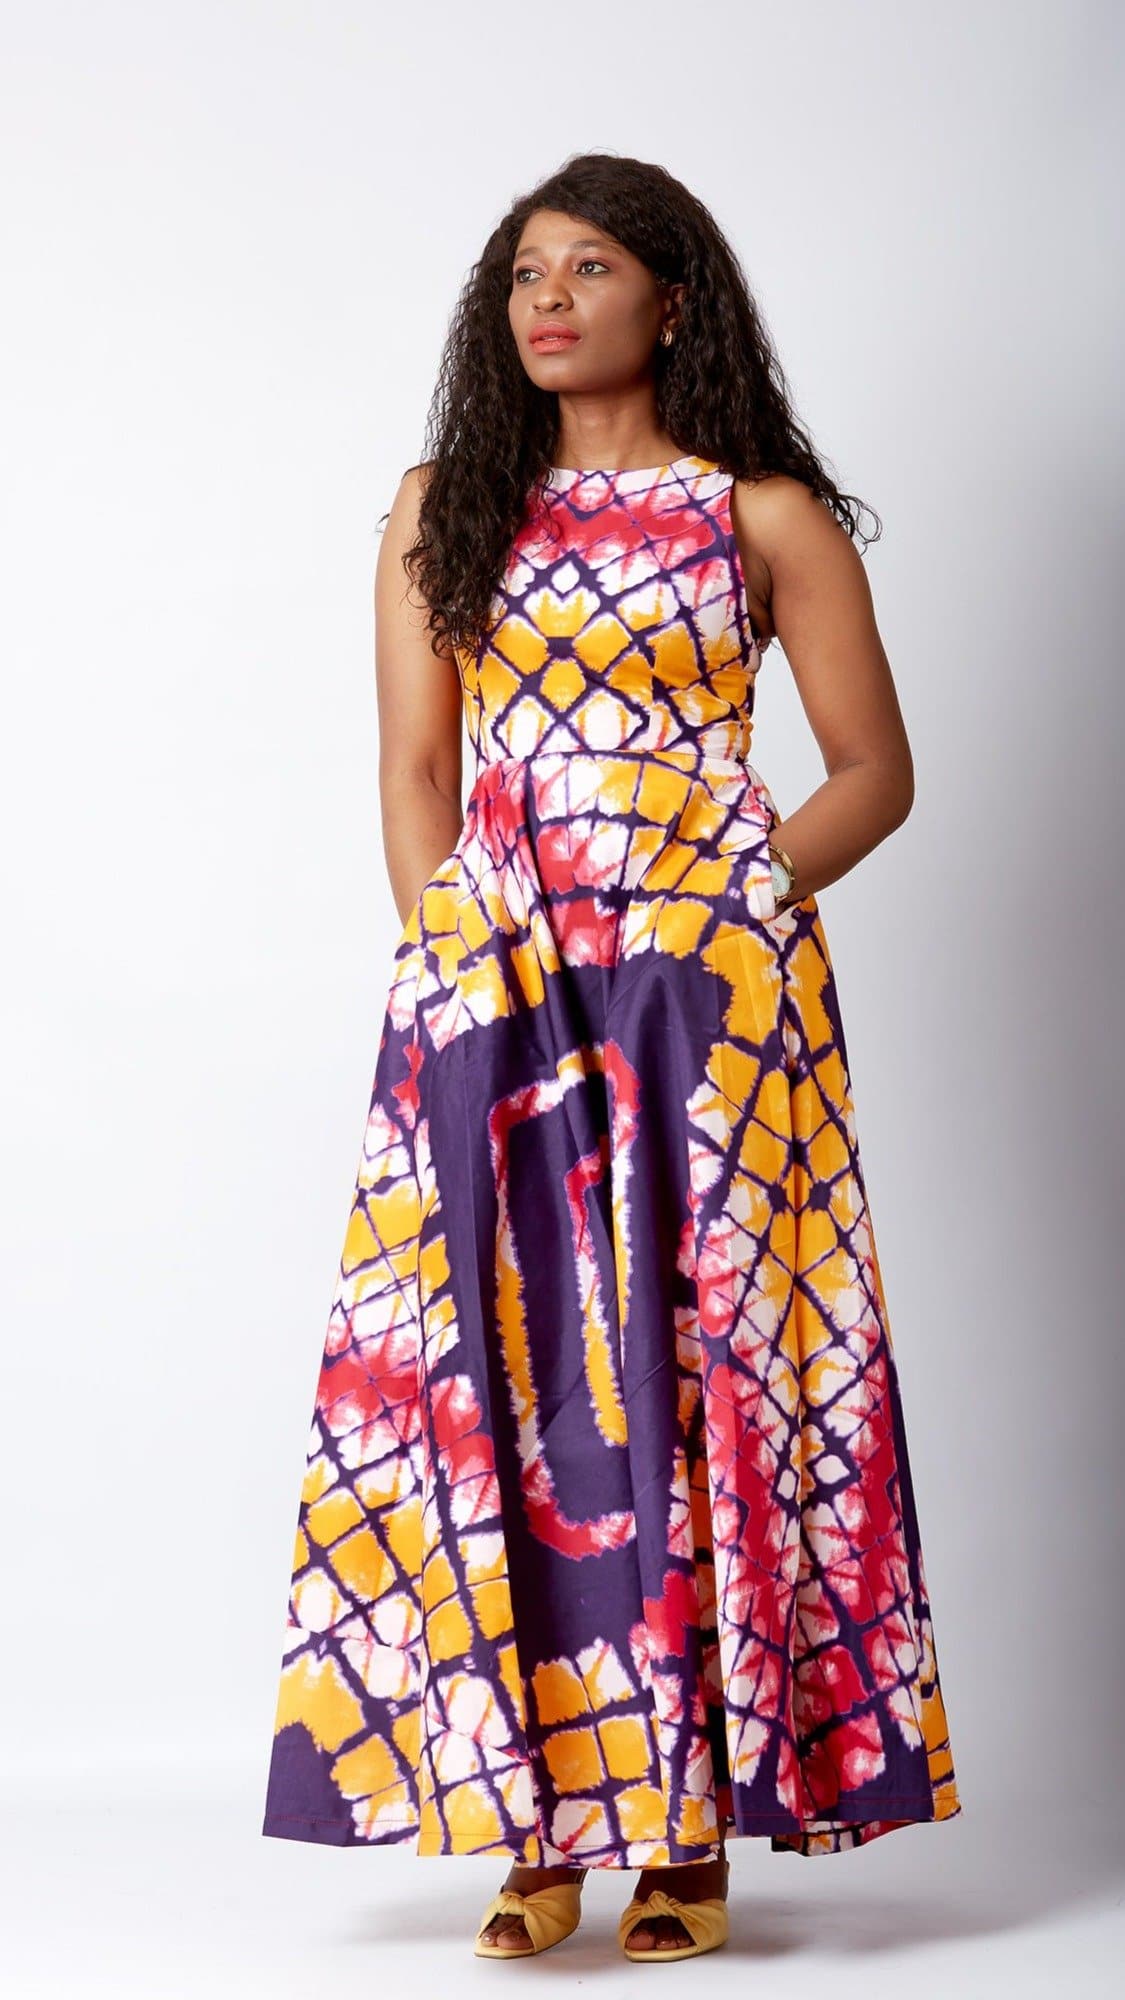 African dresses, Long African print gown, African print Maxi dresses, Floral Summer Dresses | African party dress | Black owned UK fashion brand | African clothing store | Ready to wear African clothing | African print maxi dress | African Kampala dress | Kampala dress | Kitenge dress | Sleeveless Maxi African dress  | Online African Clothing Store